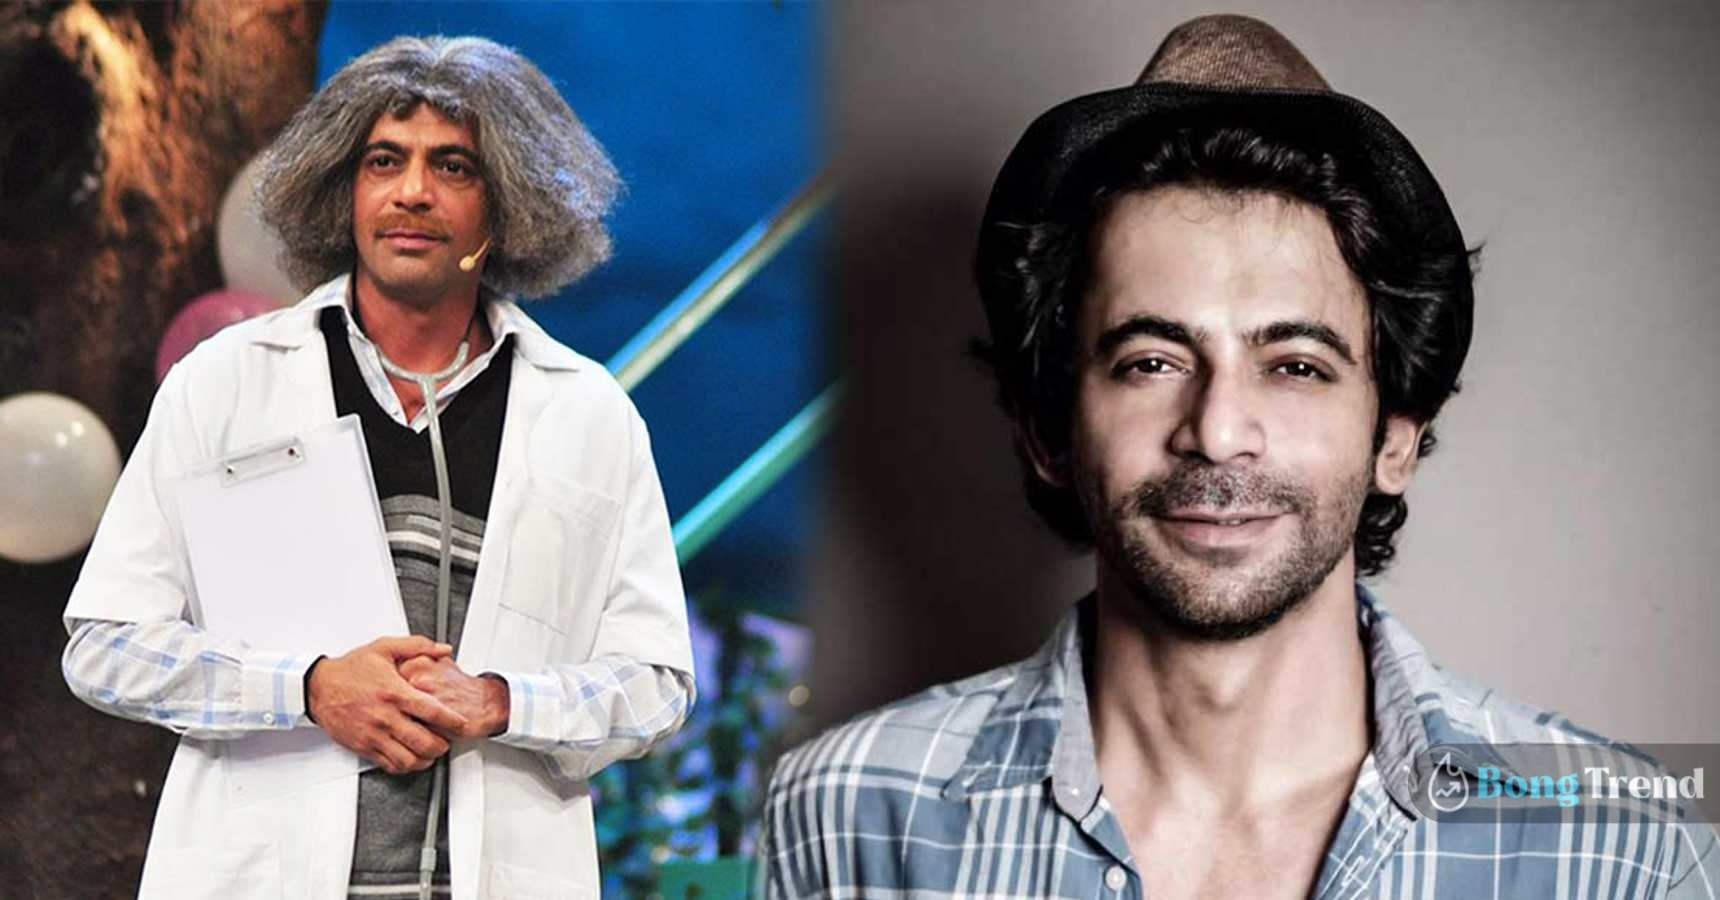 Comedian actor Sunil Grover had heart blockage gone through surgery